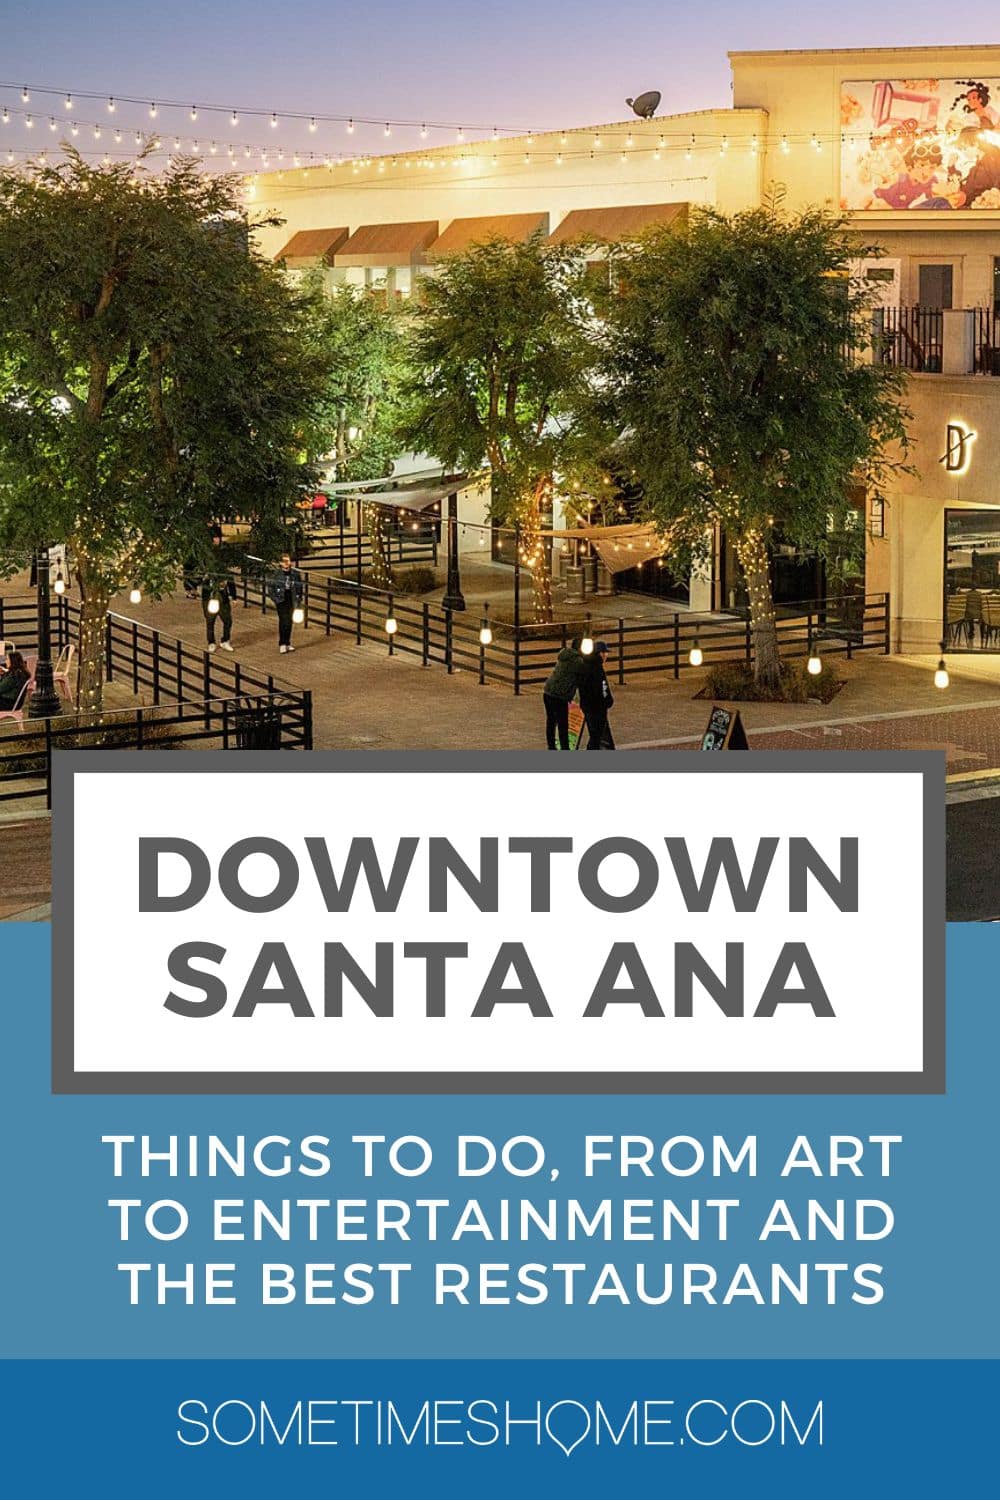 Downtown Santa Ana: things to do, from art to entertainment and the best restaurants with an image of a street in the city during dusk.